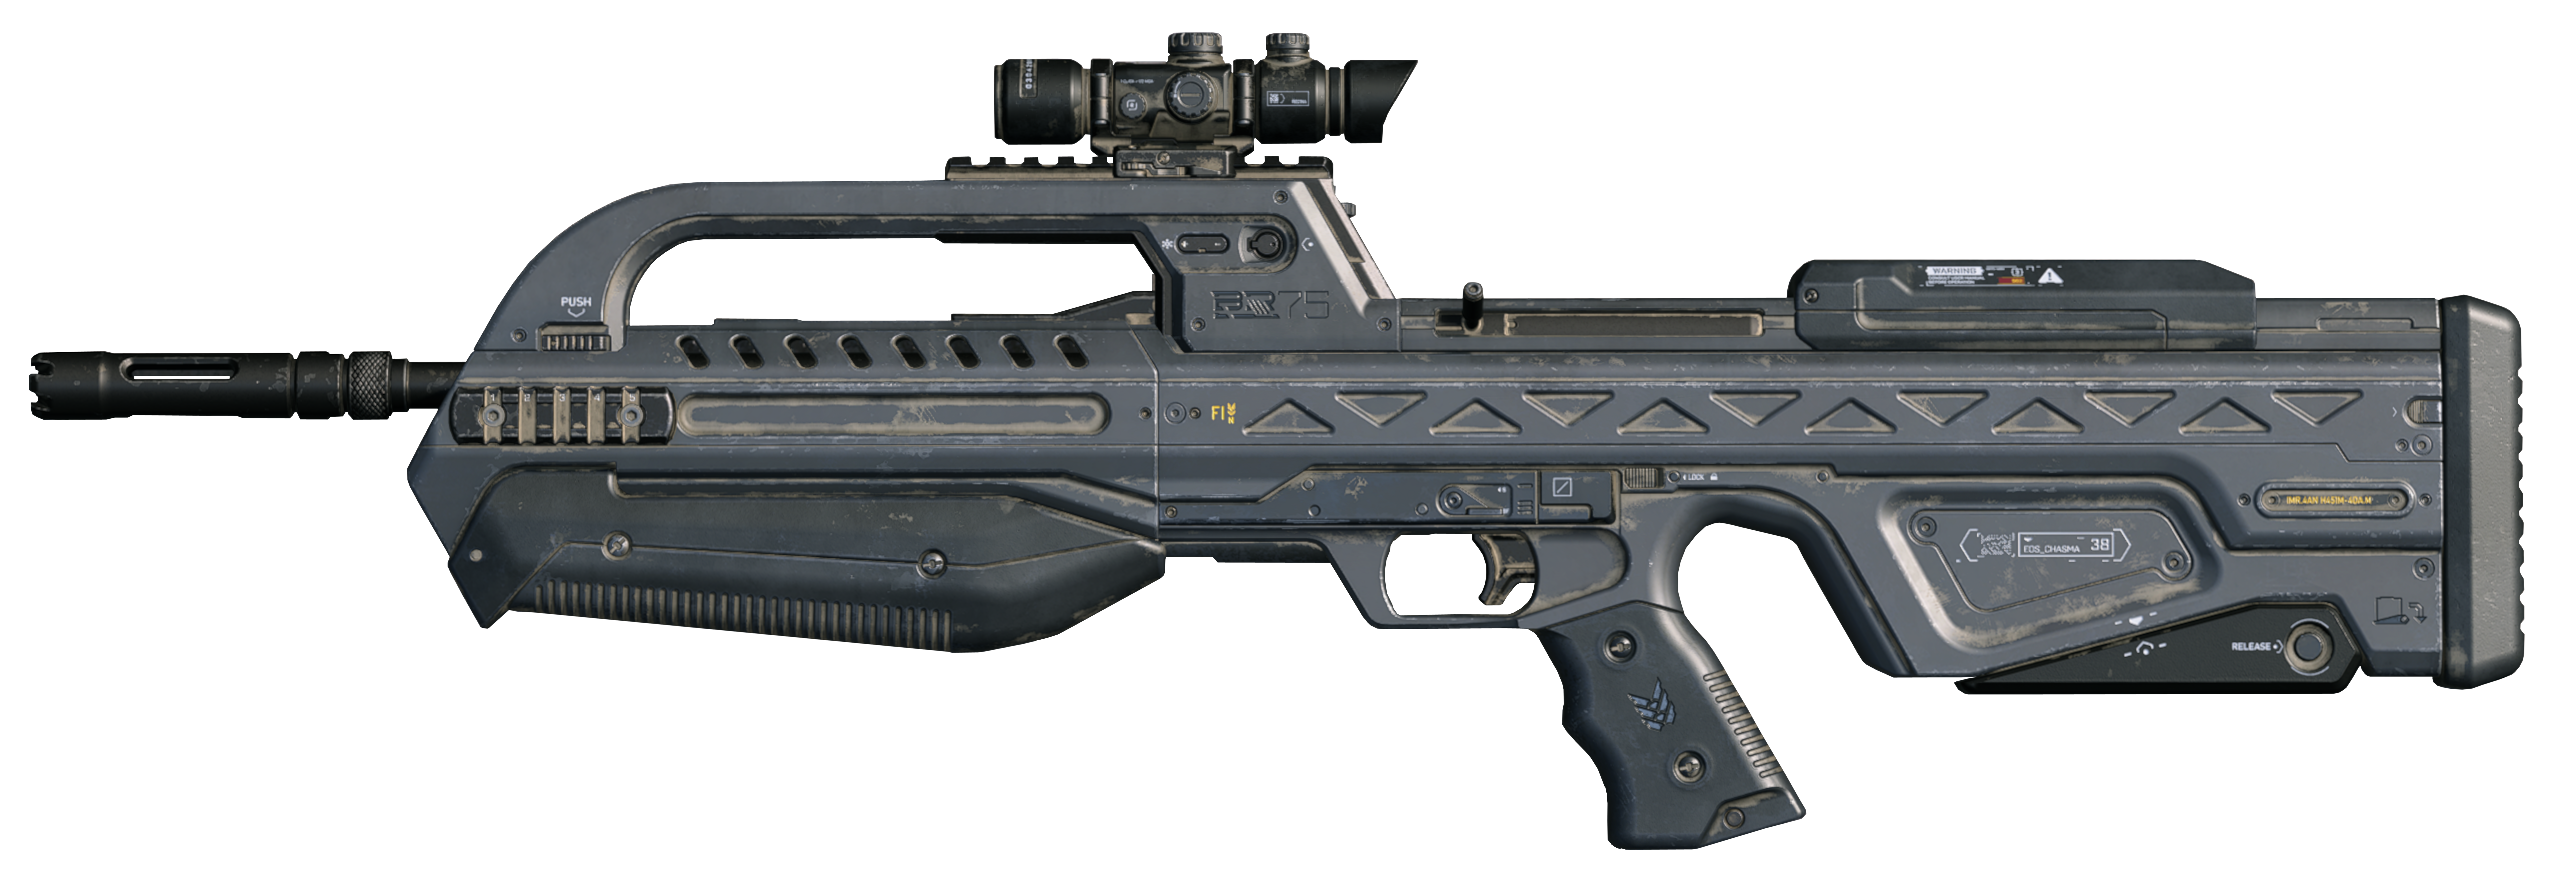 HINF Battle Rifle (render).png